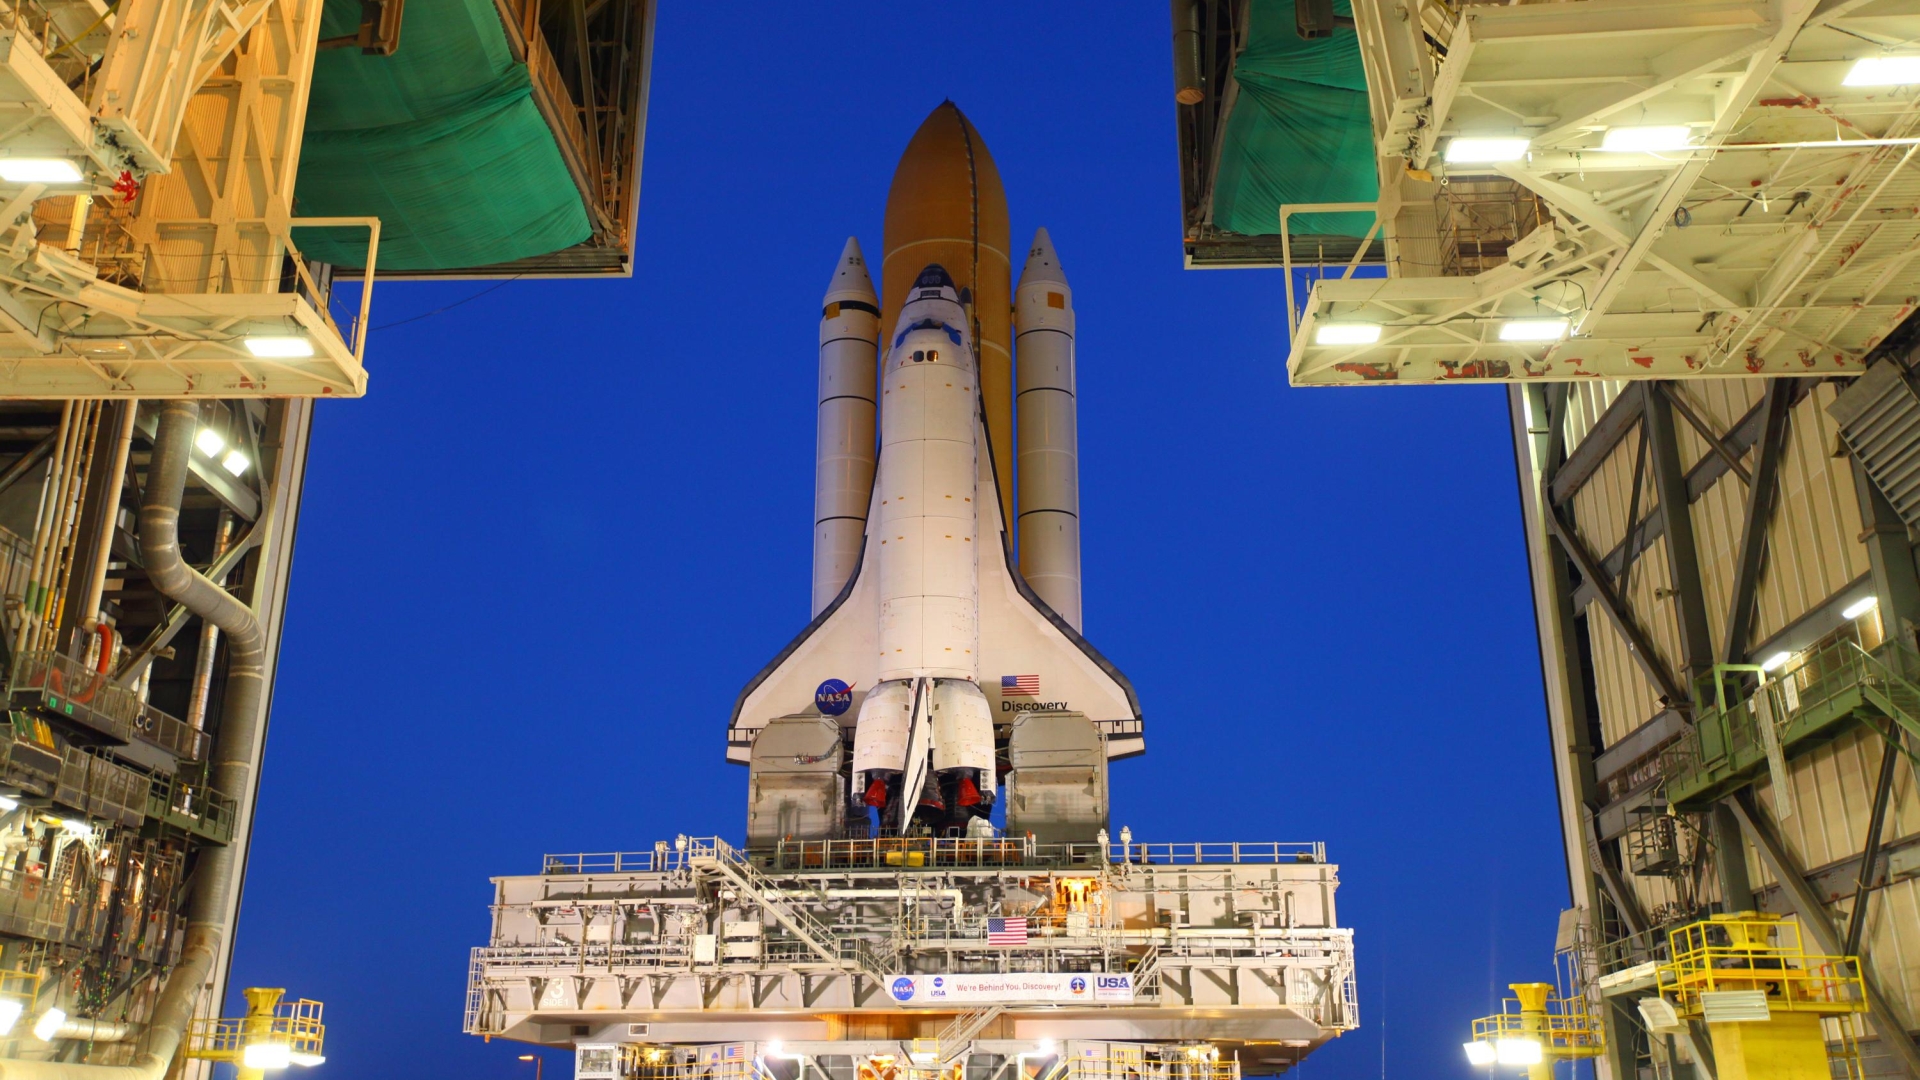 Vehicles Space Shuttle Discovery 1920x1080